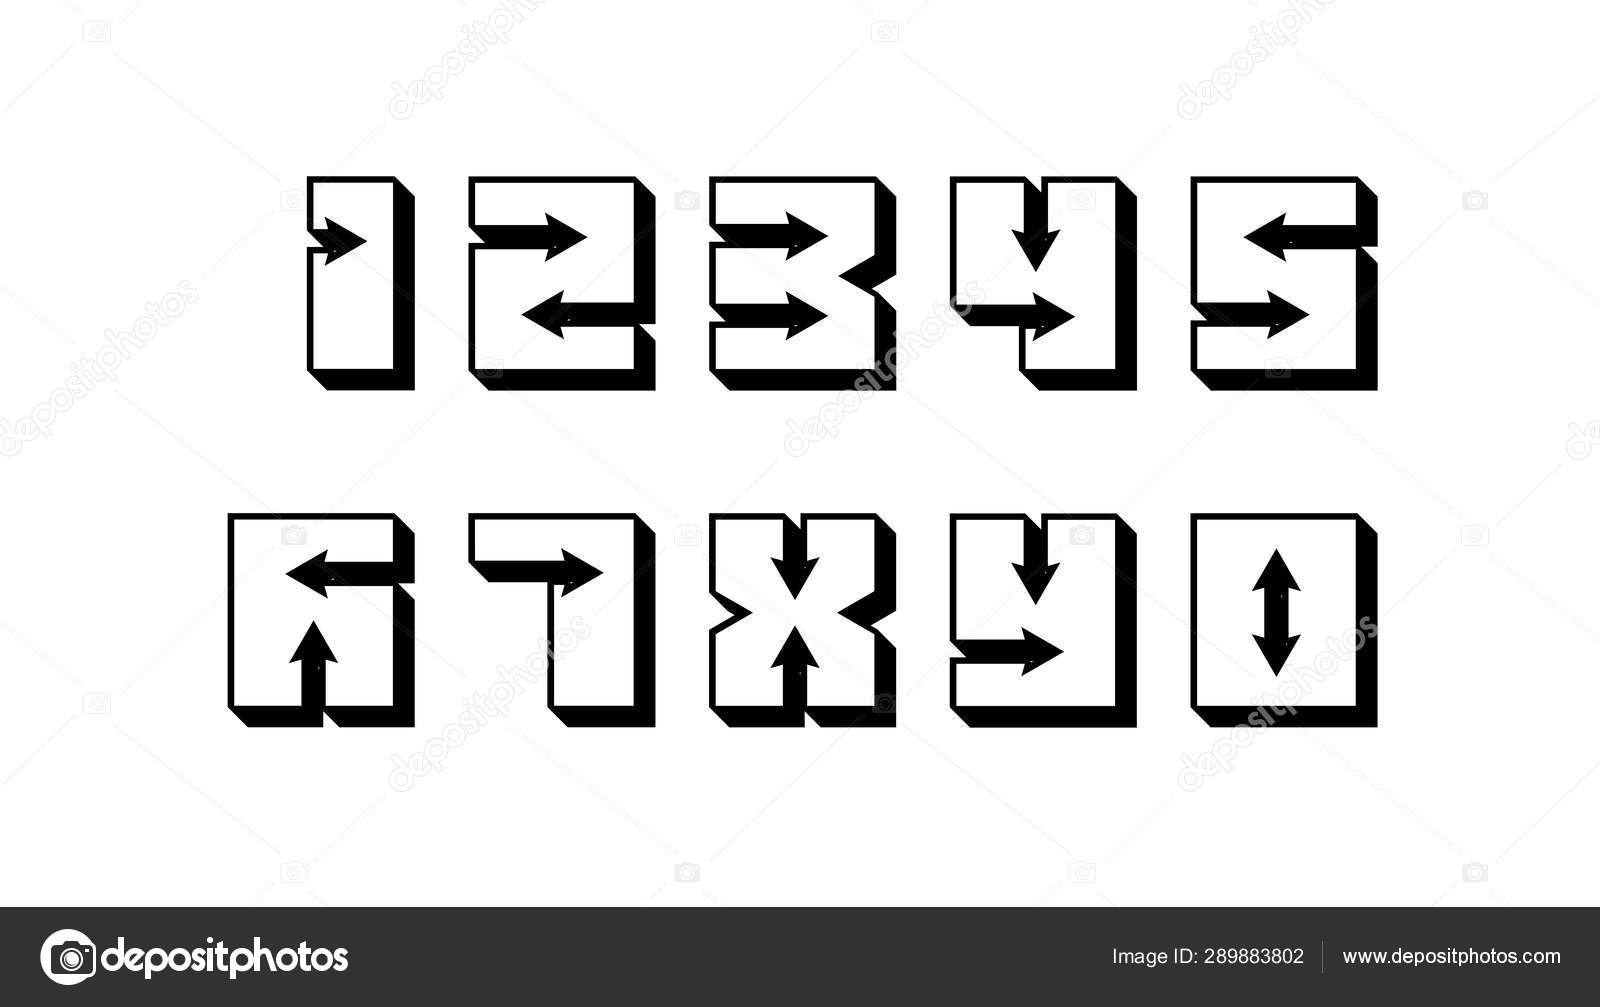 Numbers 123 Colourful Set In 3d Regular Retro Style With Arrows In